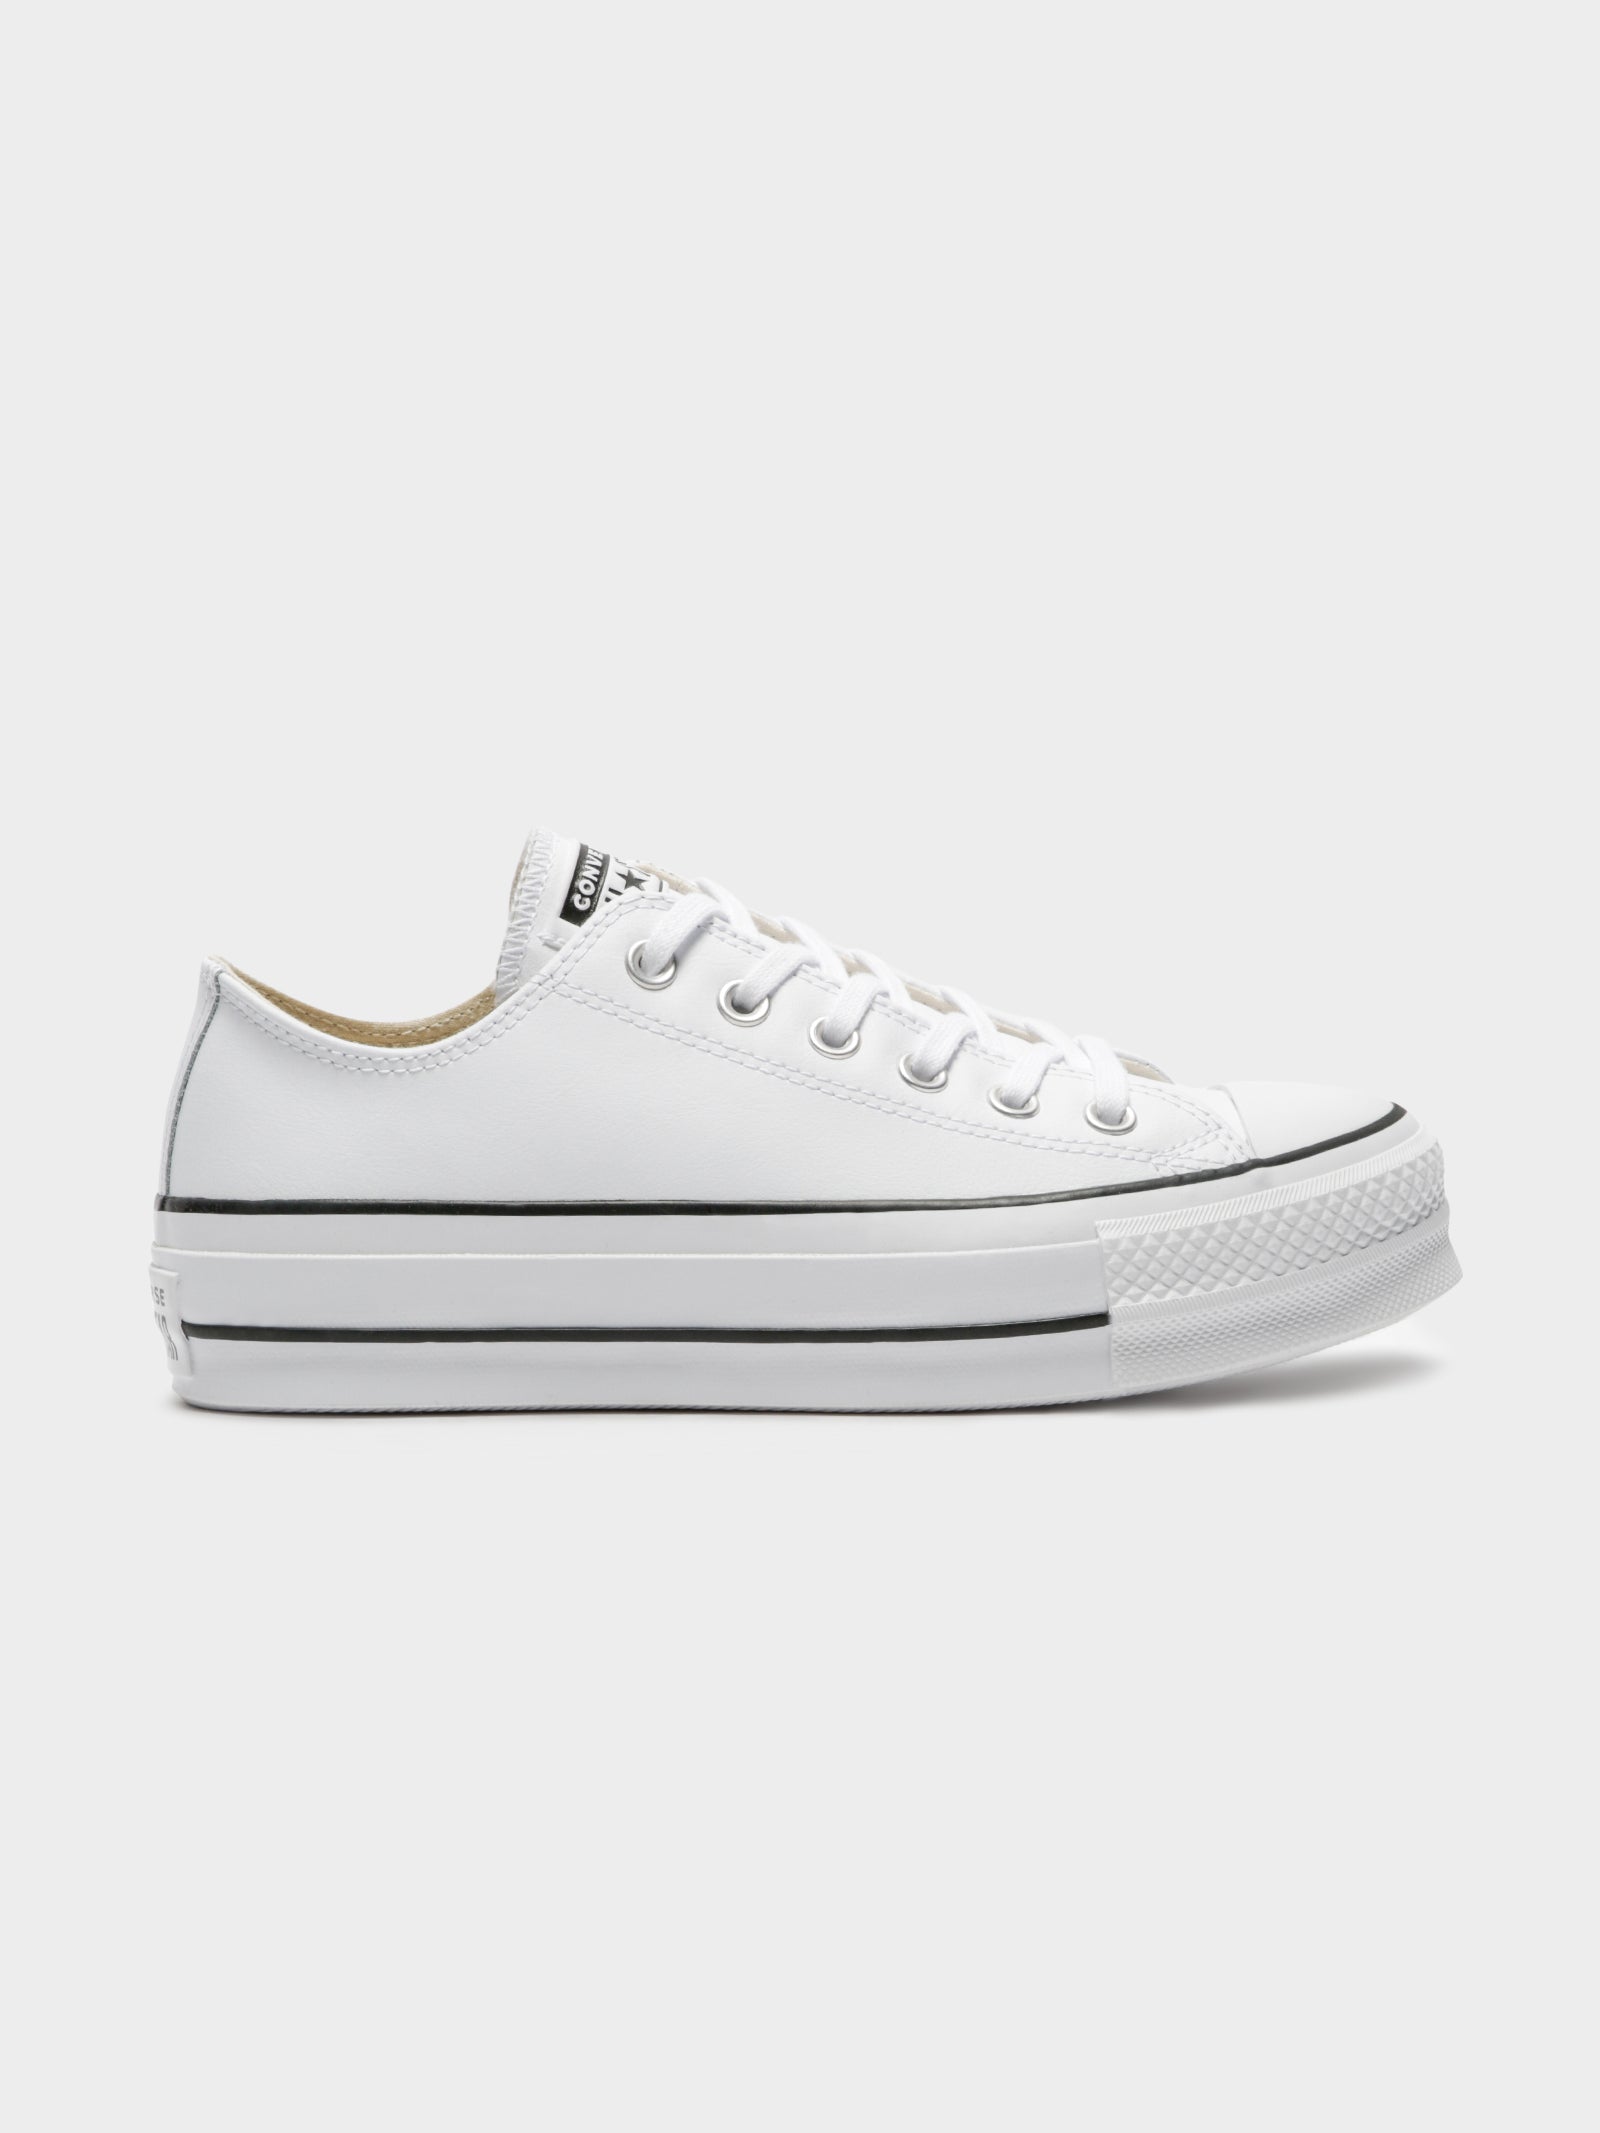 Pensativo Cena Comprimir Womens Chuck Taylor All Star Leather Platform Sneakers in White & Blac -  Glue Store